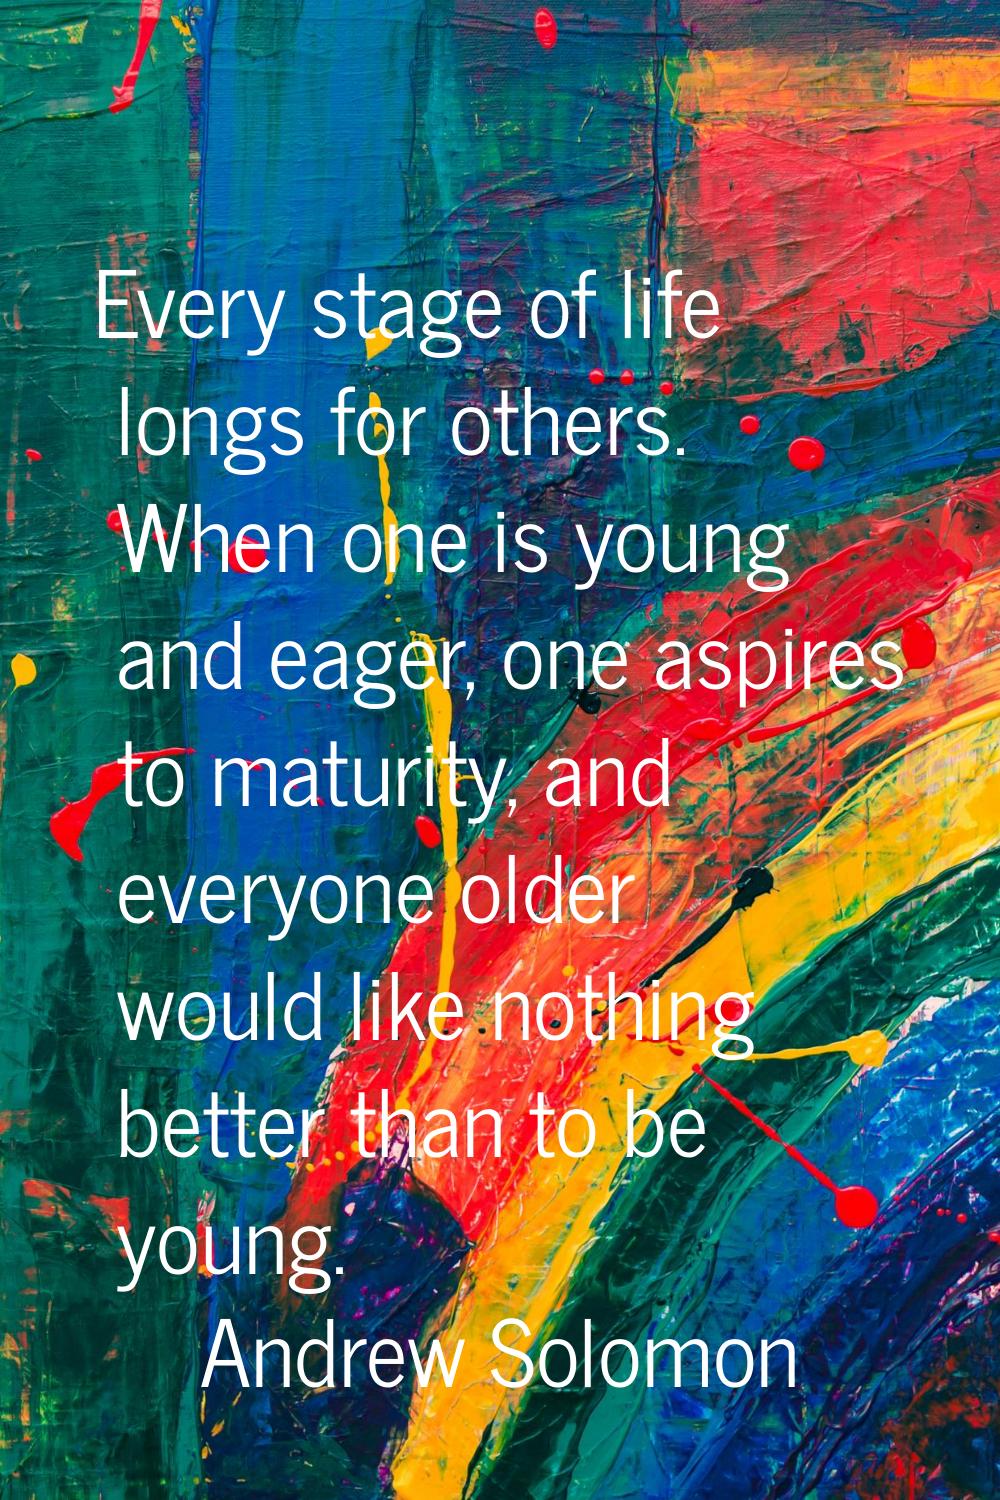 Every stage of life longs for others. When one is young and eager, one aspires to maturity, and eve